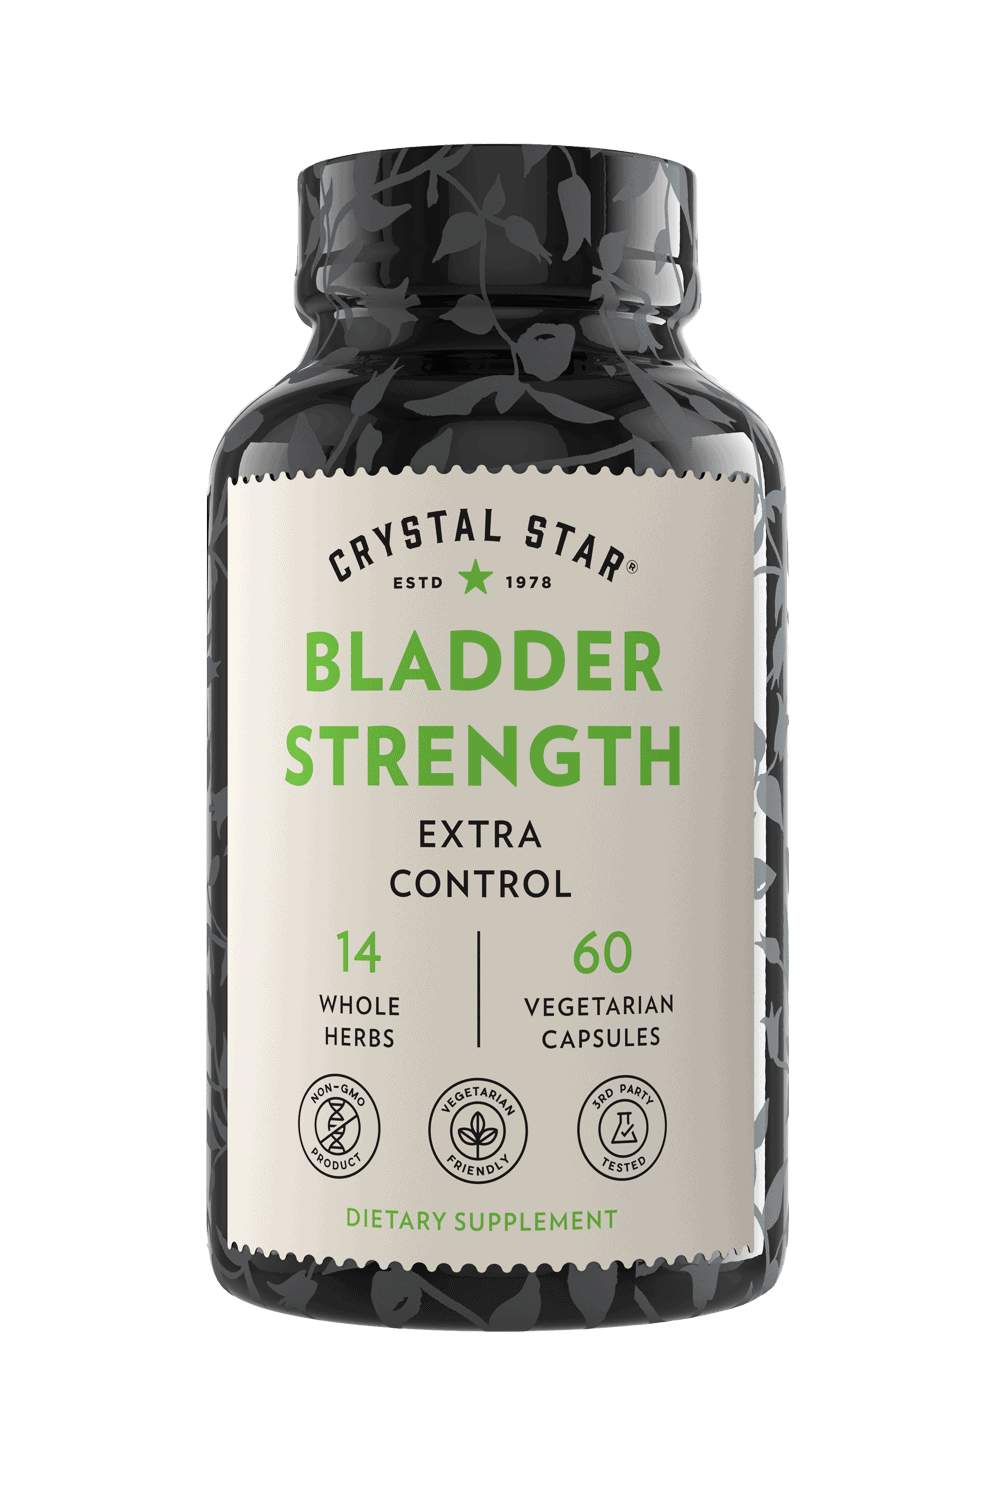 Crystal Star Bladder Strength supplement for extra control, Front Side